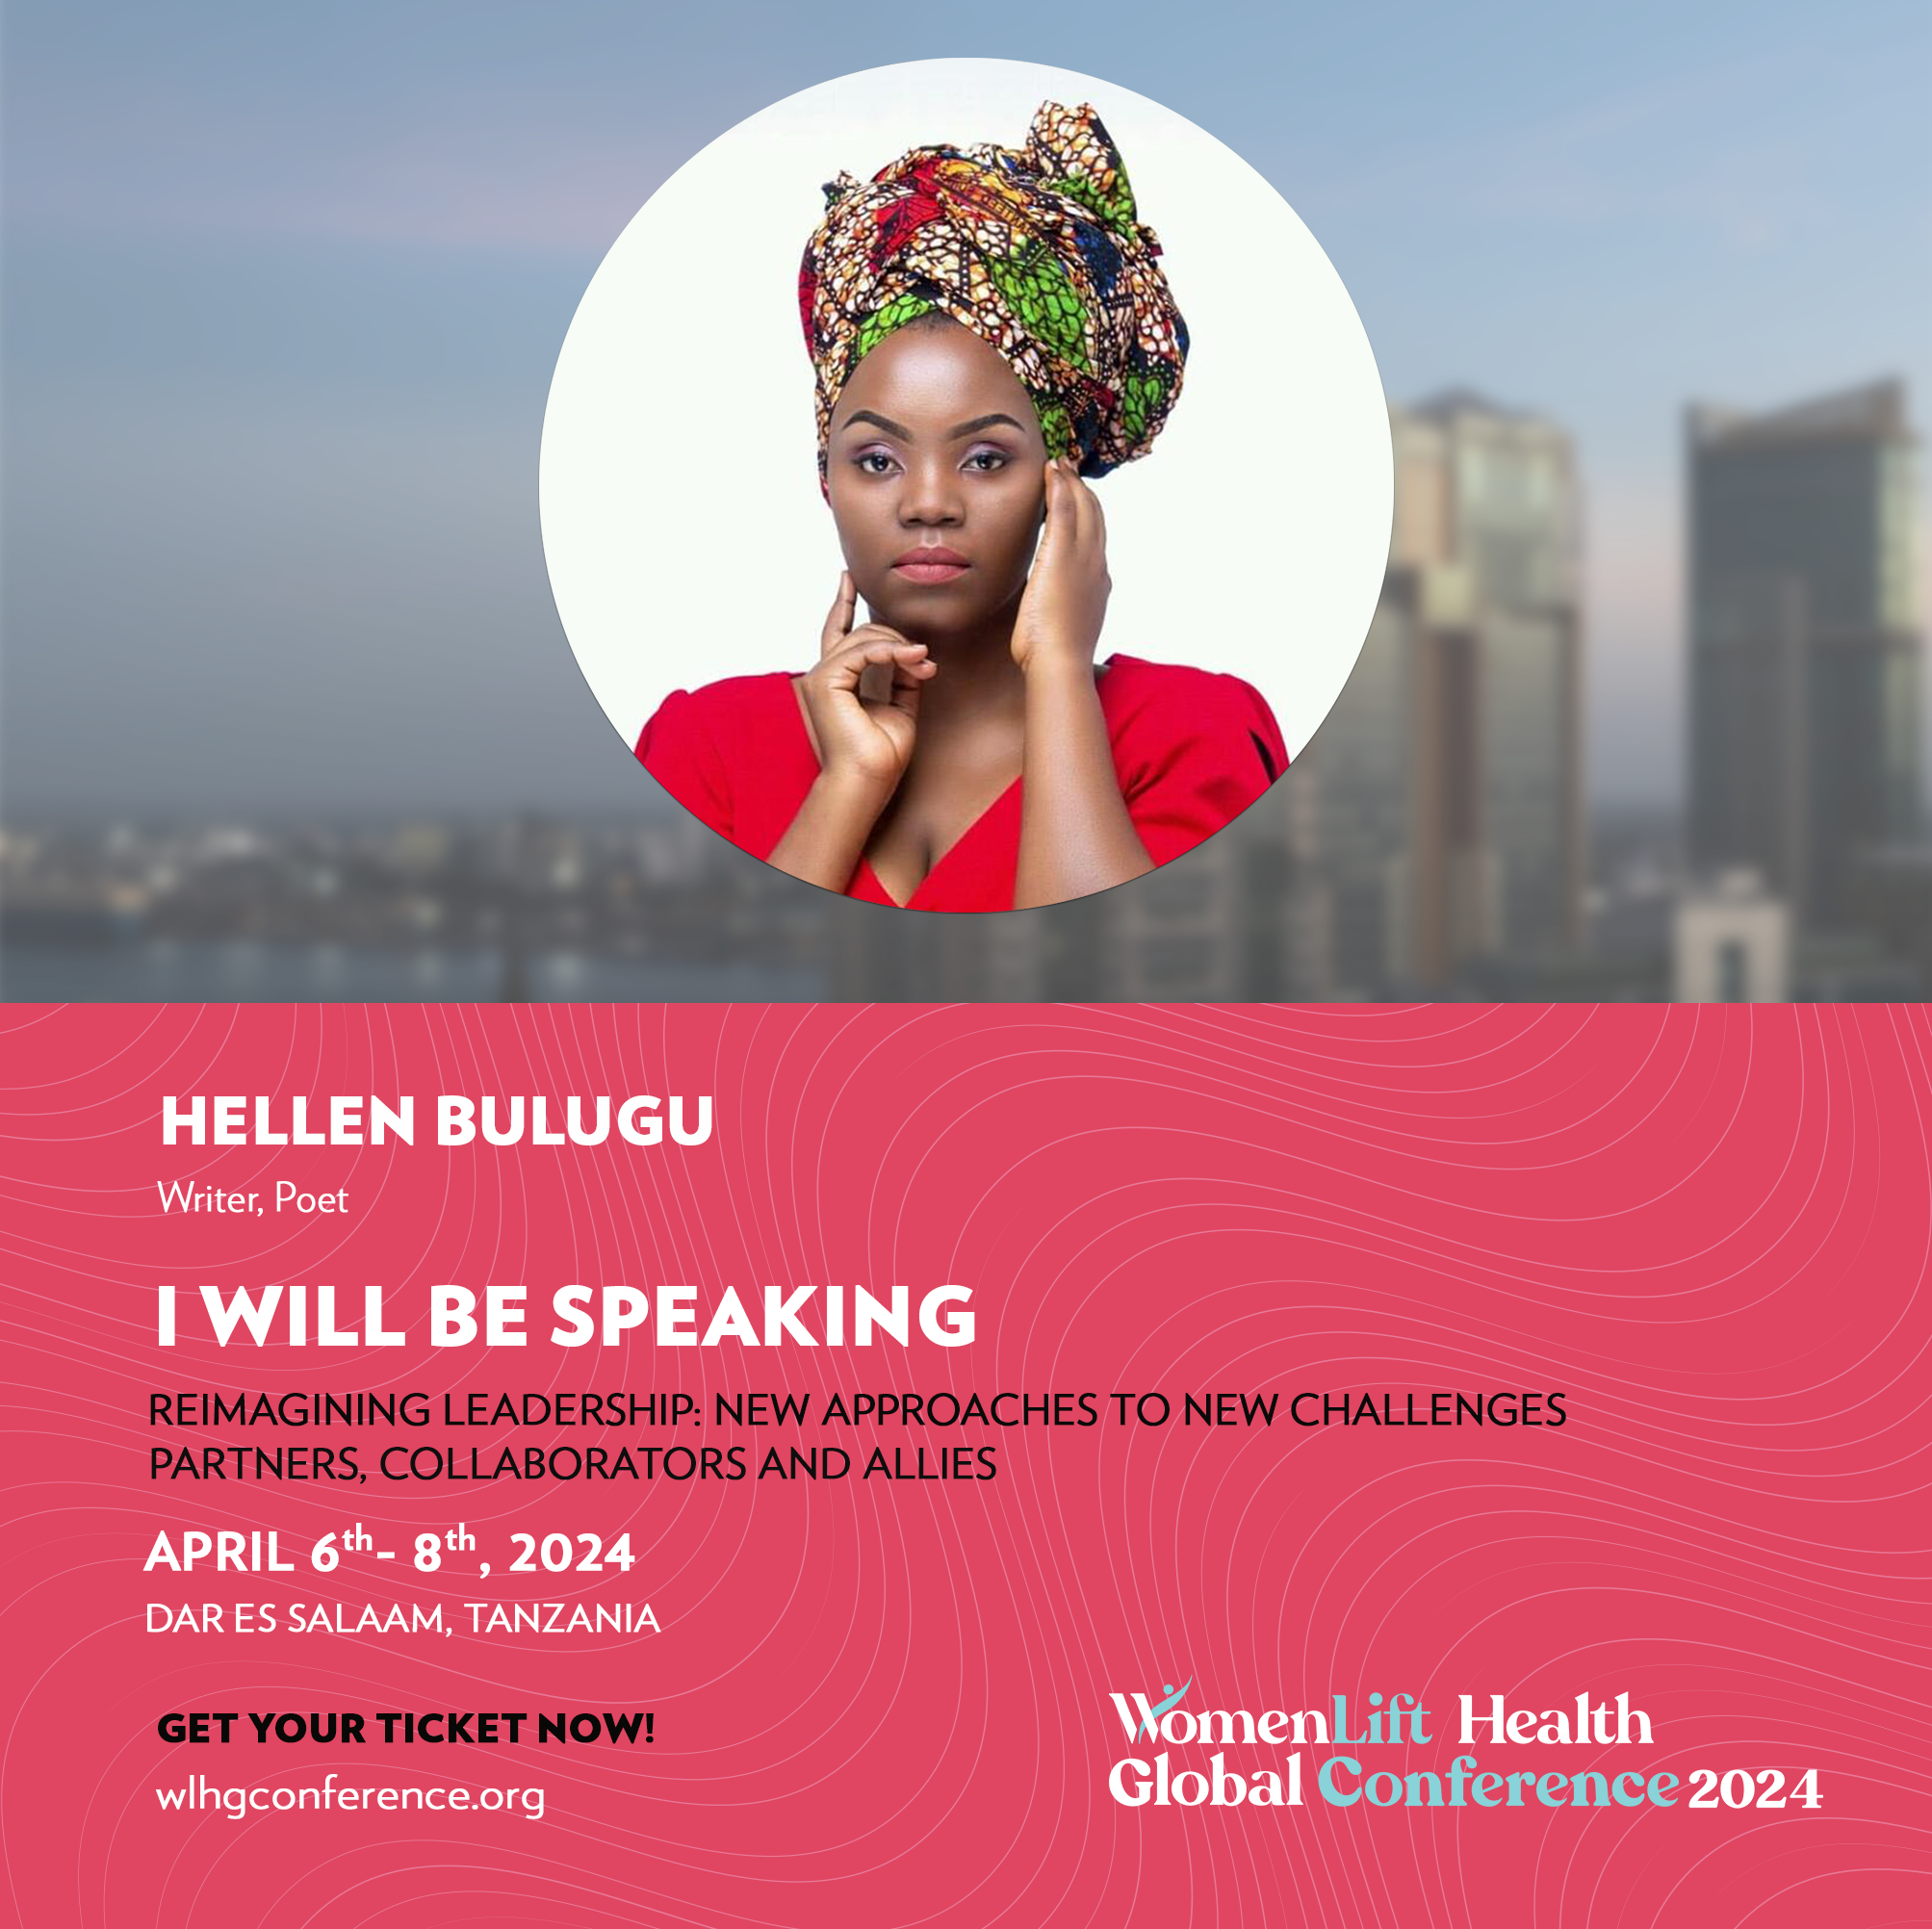 Hellen Bulugu will be speaking at the WomenLift Health Global Conference 2024